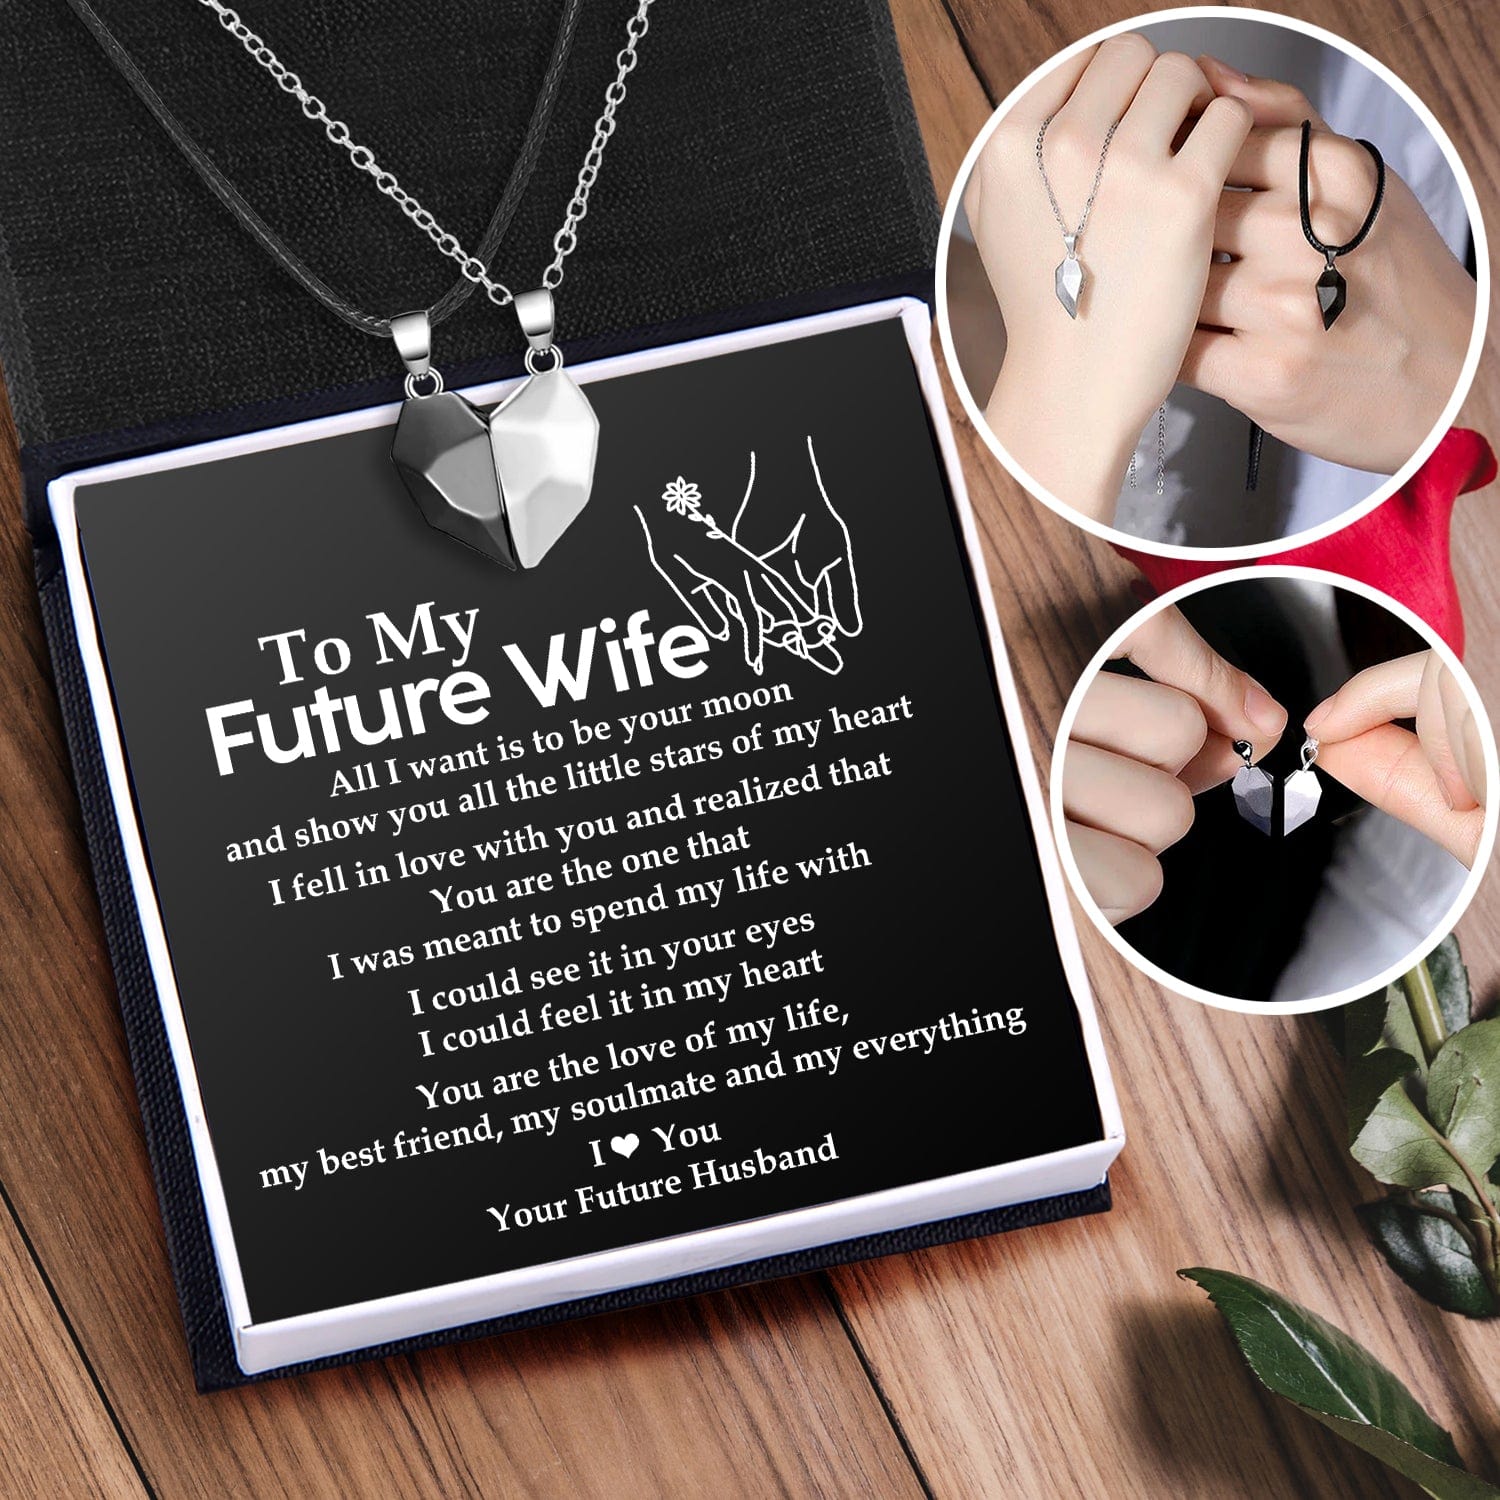 Magnetic Love Necklaces - Family - To My Future Wife - I Love You - Gnni25004